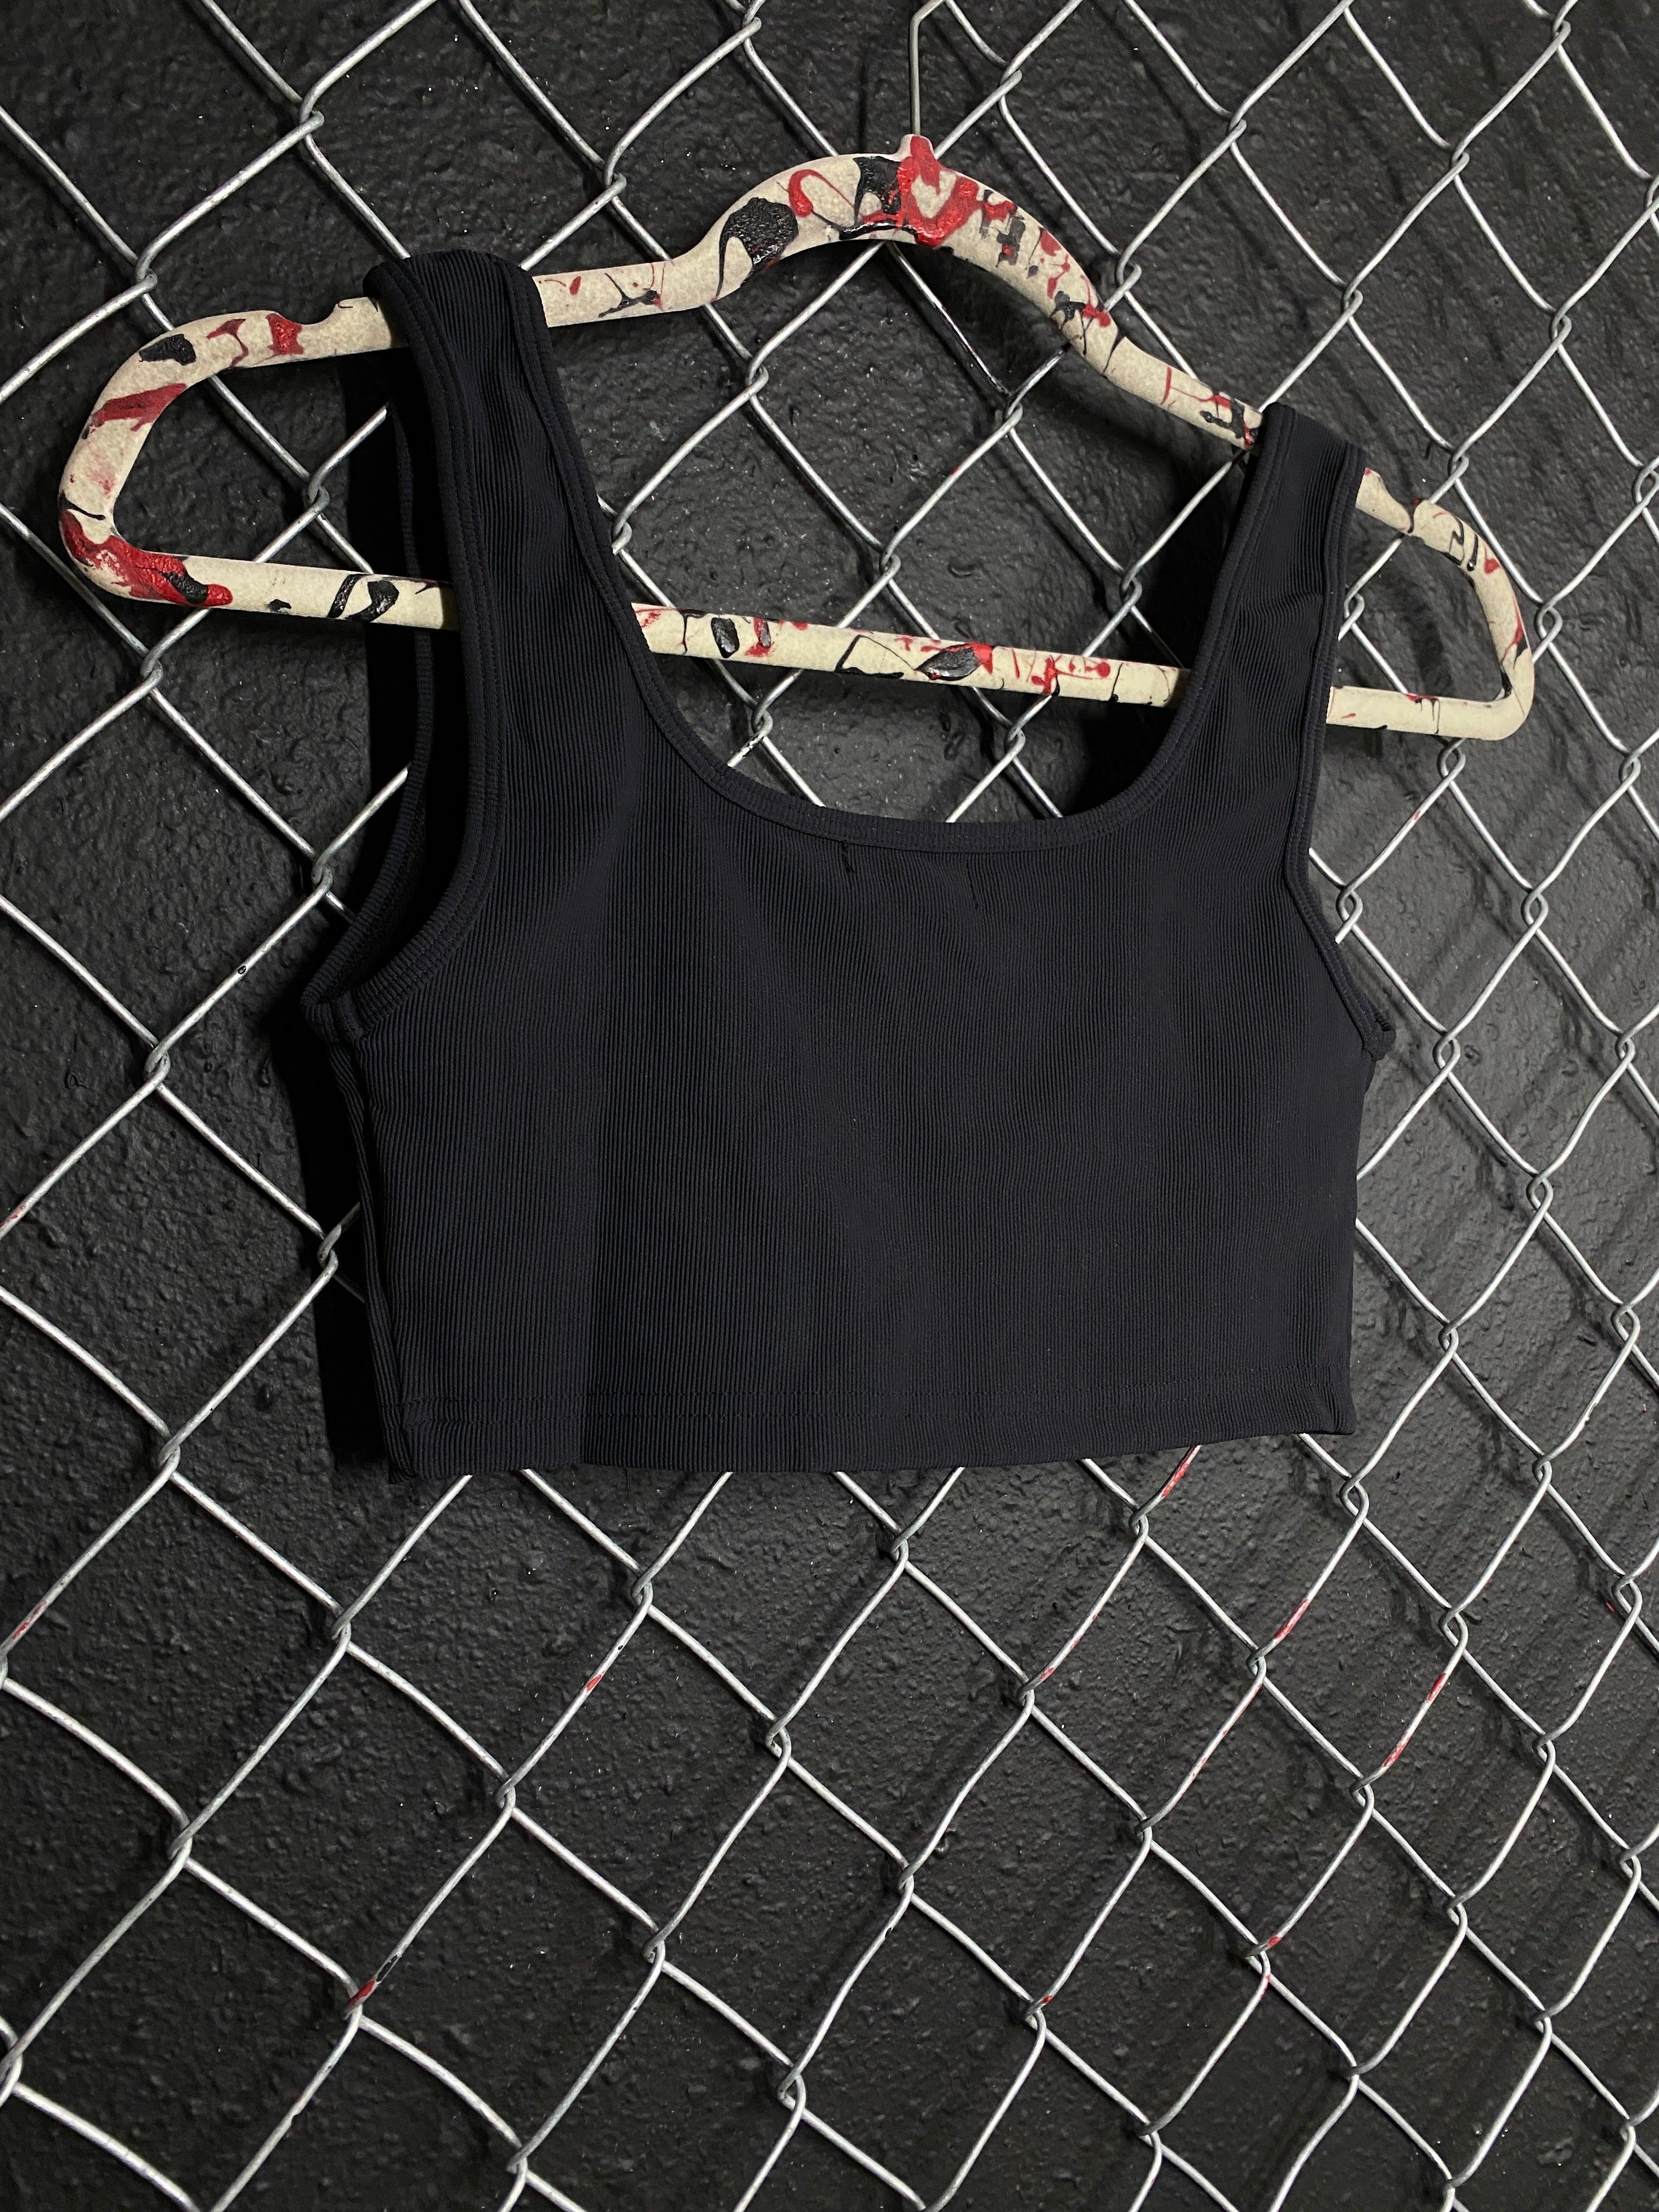 TDC BLACK CROP TOP - The Drive Clothing